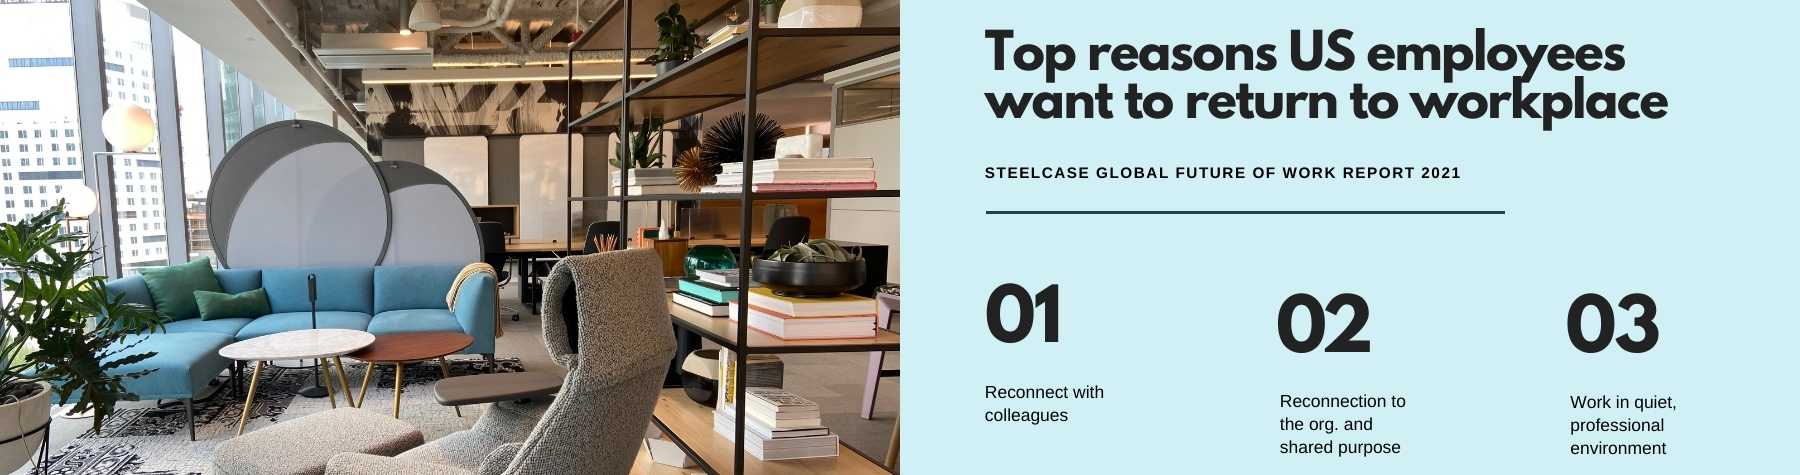 Steelcase research